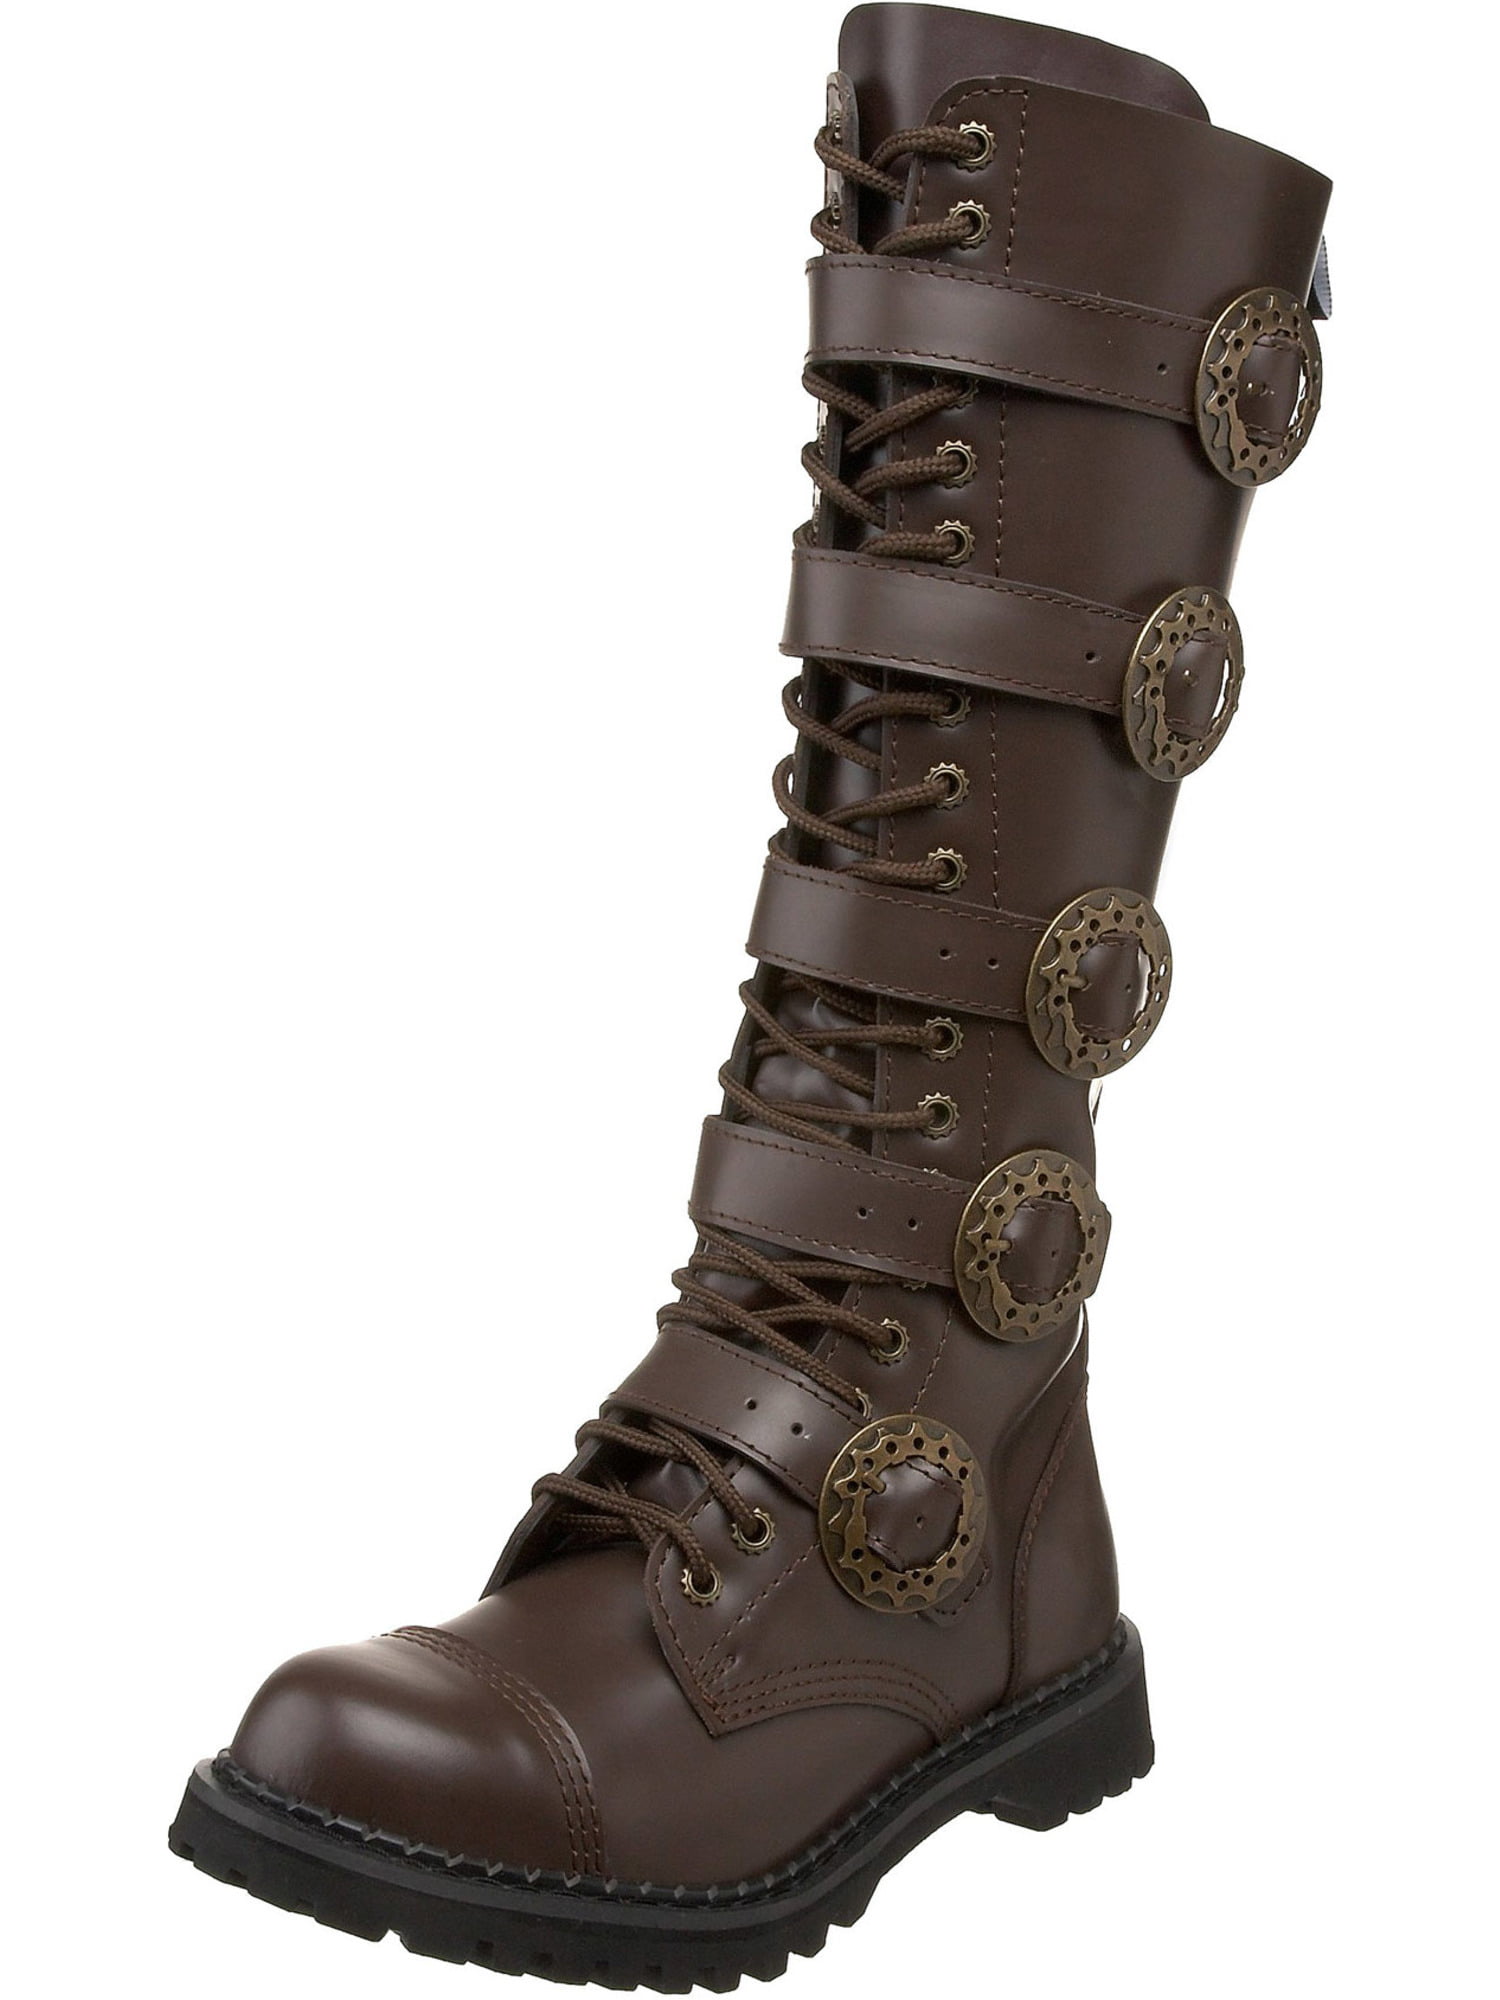 Demonia - MENS SIZING Knee High Boots Brown Combat Boots Steampunk ...